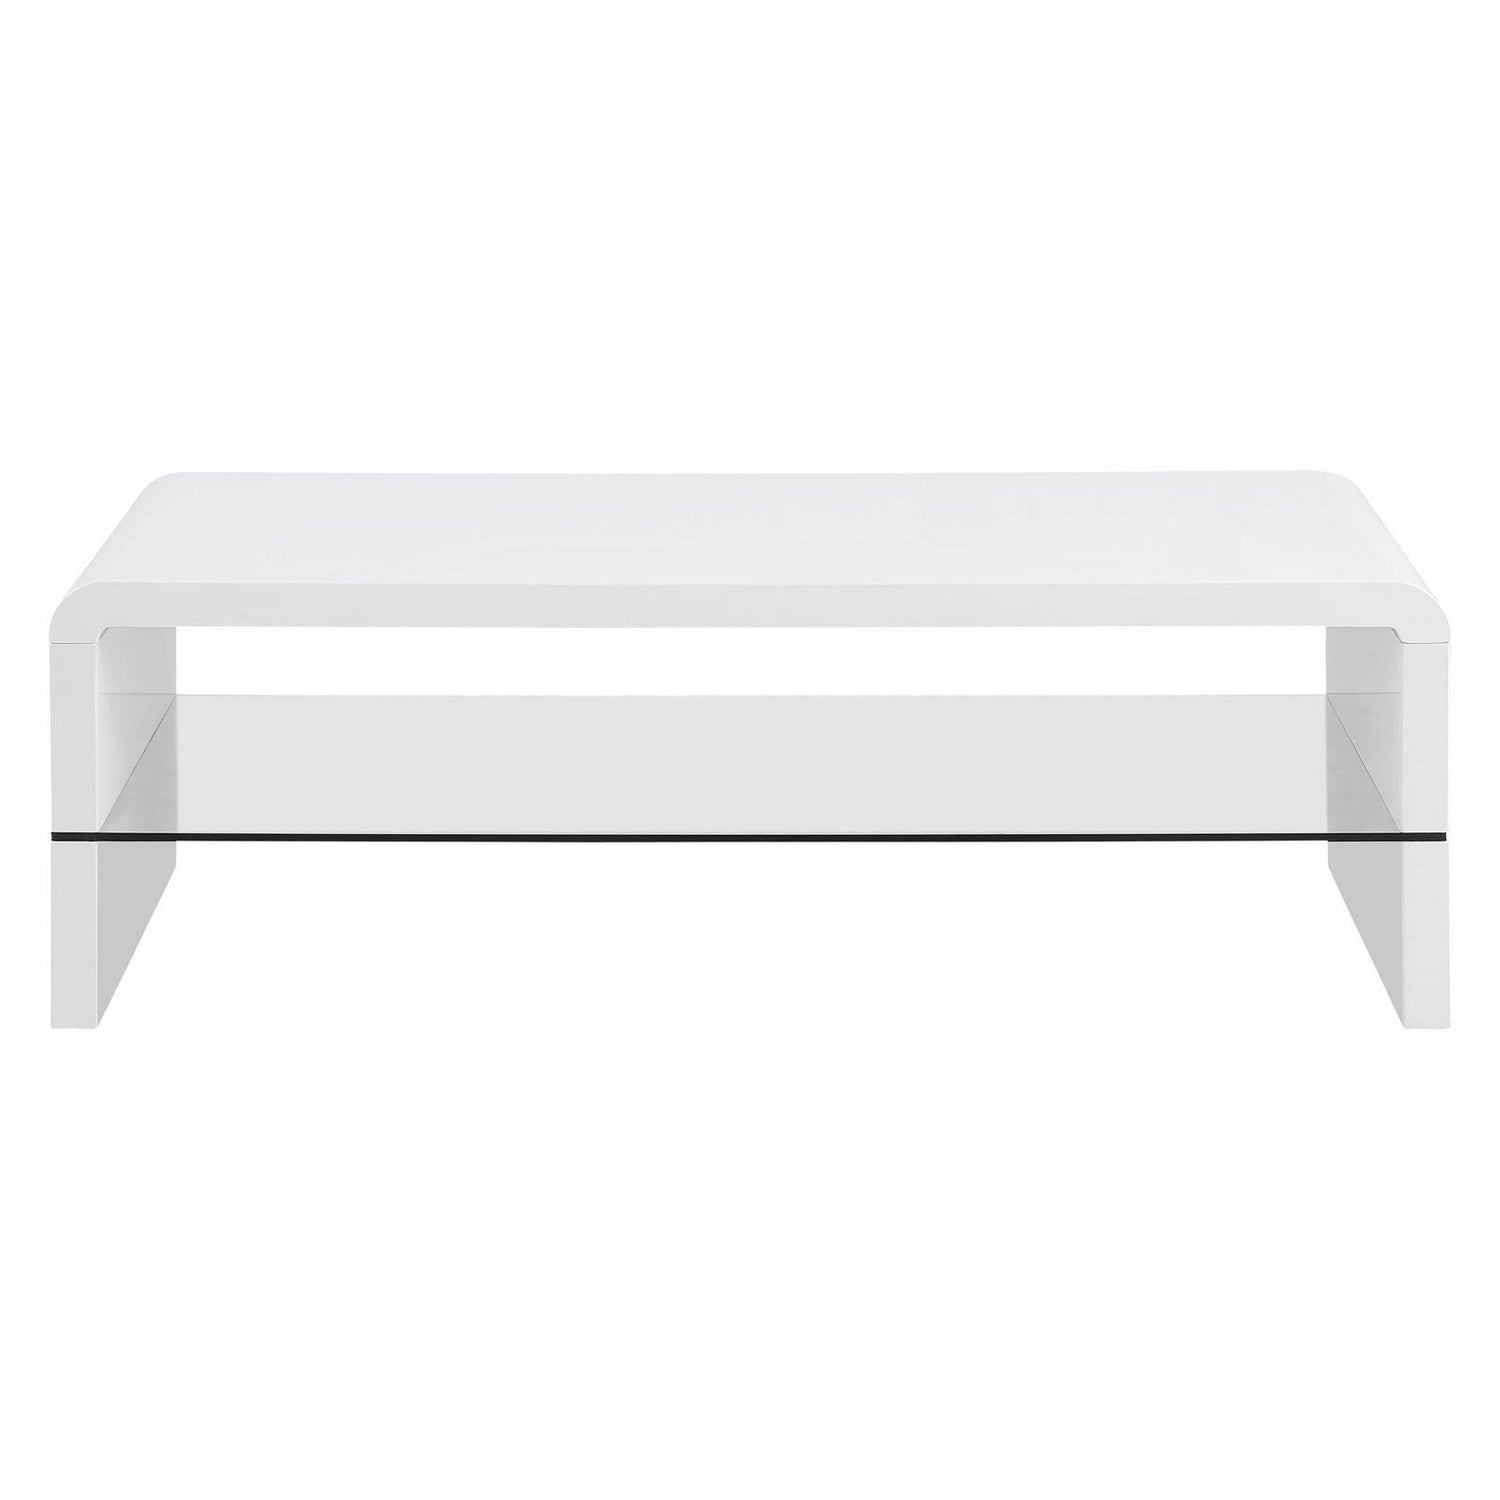 Airell Rectangular Coffee Table with Glass Shelf White High Gloss 703798